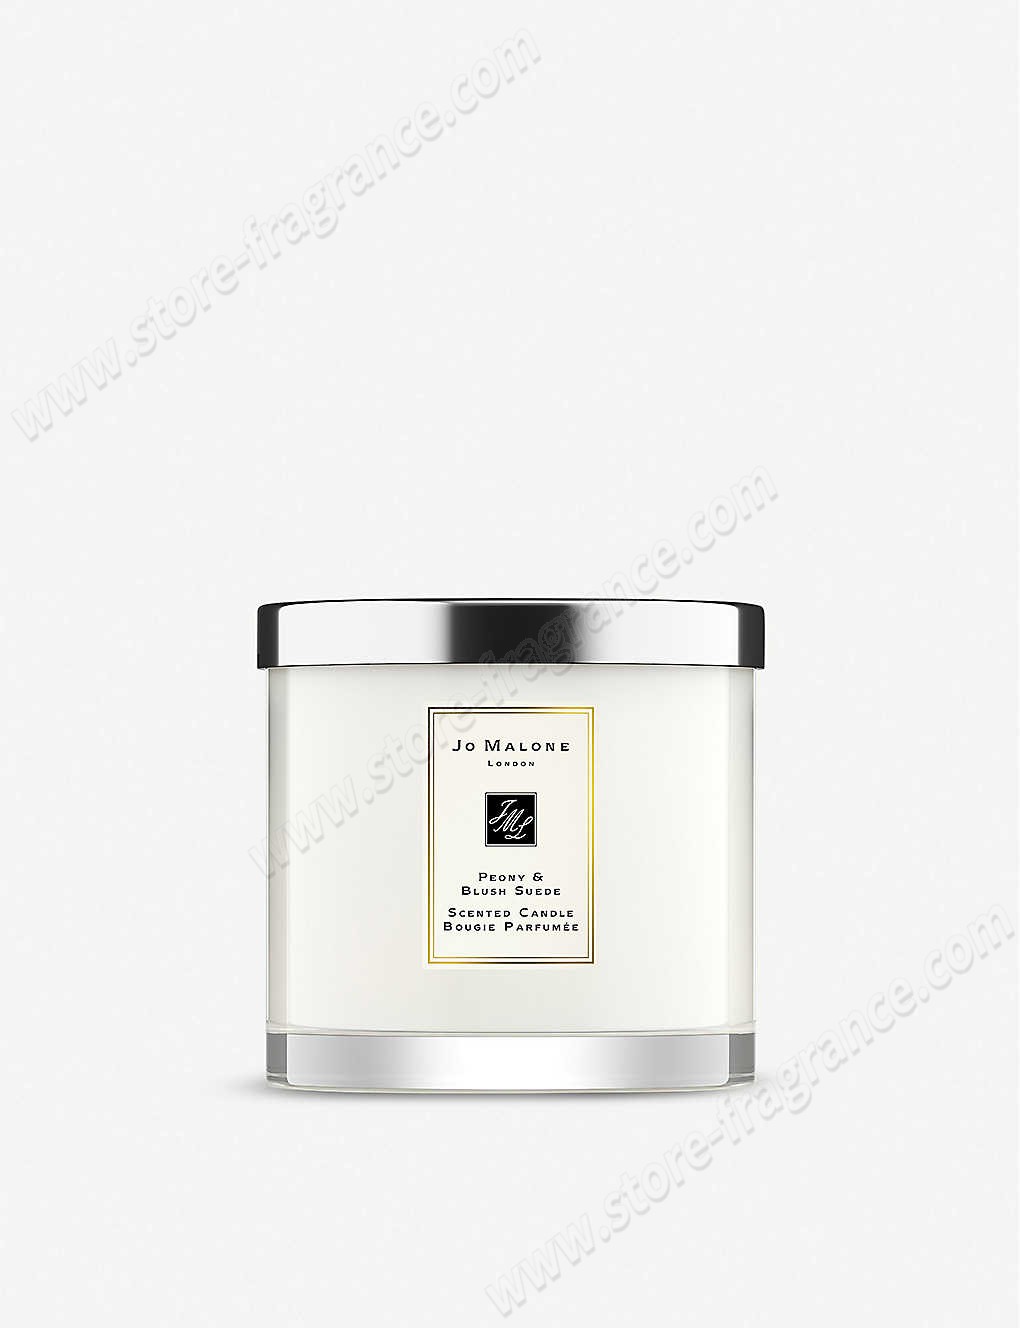 JO MALONE LONDON/Peony and Blush Suede deluxe candle 600g ✿ Discount Store - -0